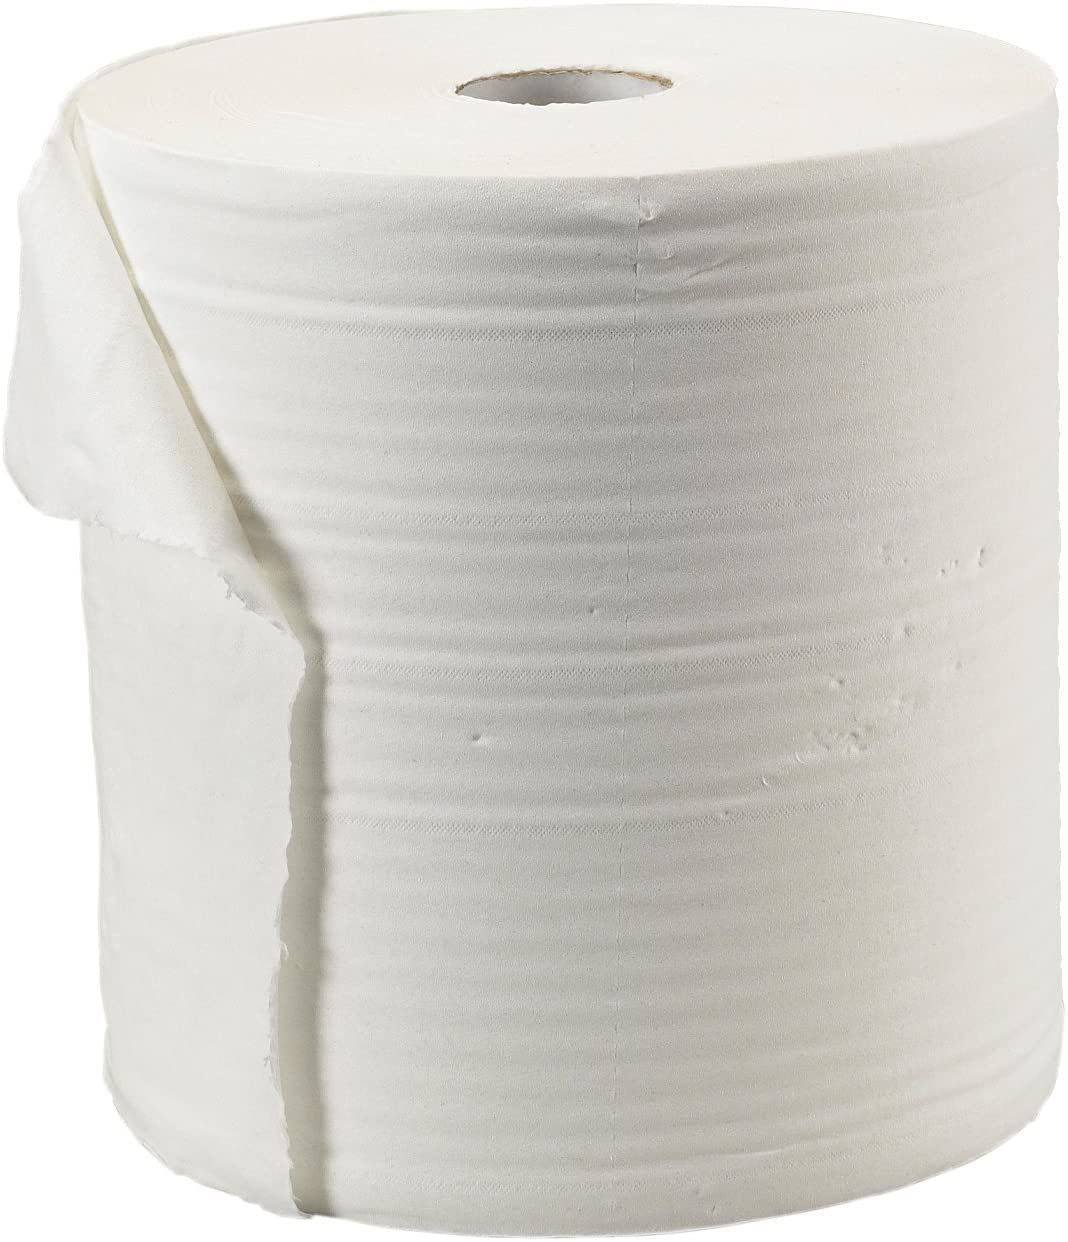 Everbuild Paper Roll 2 Ply White 260m